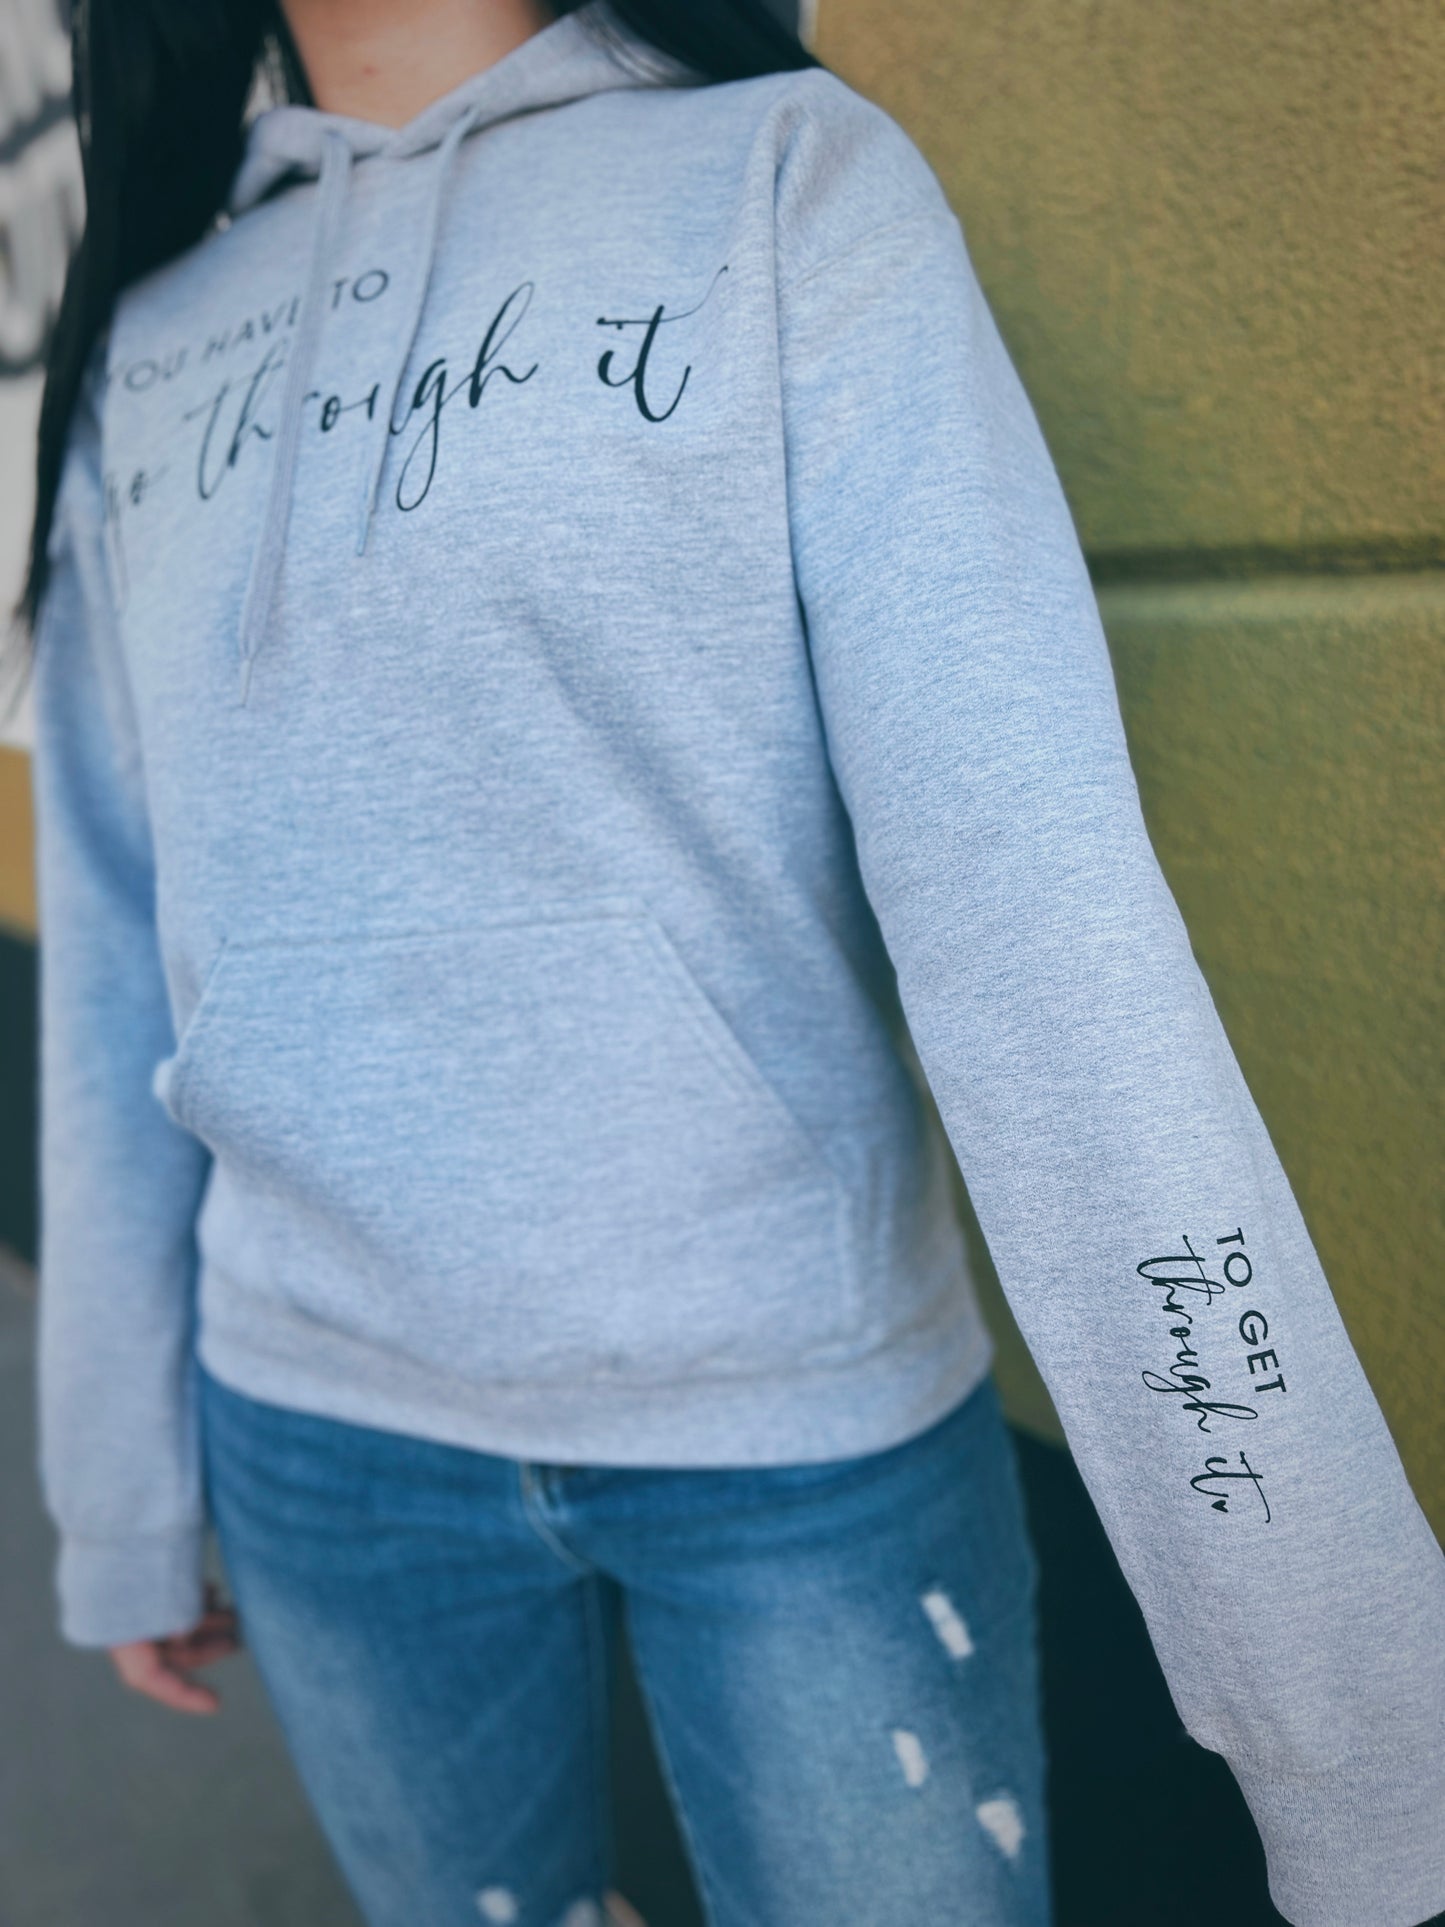 You Have To Go Through It.. To Get Through It Hoodie